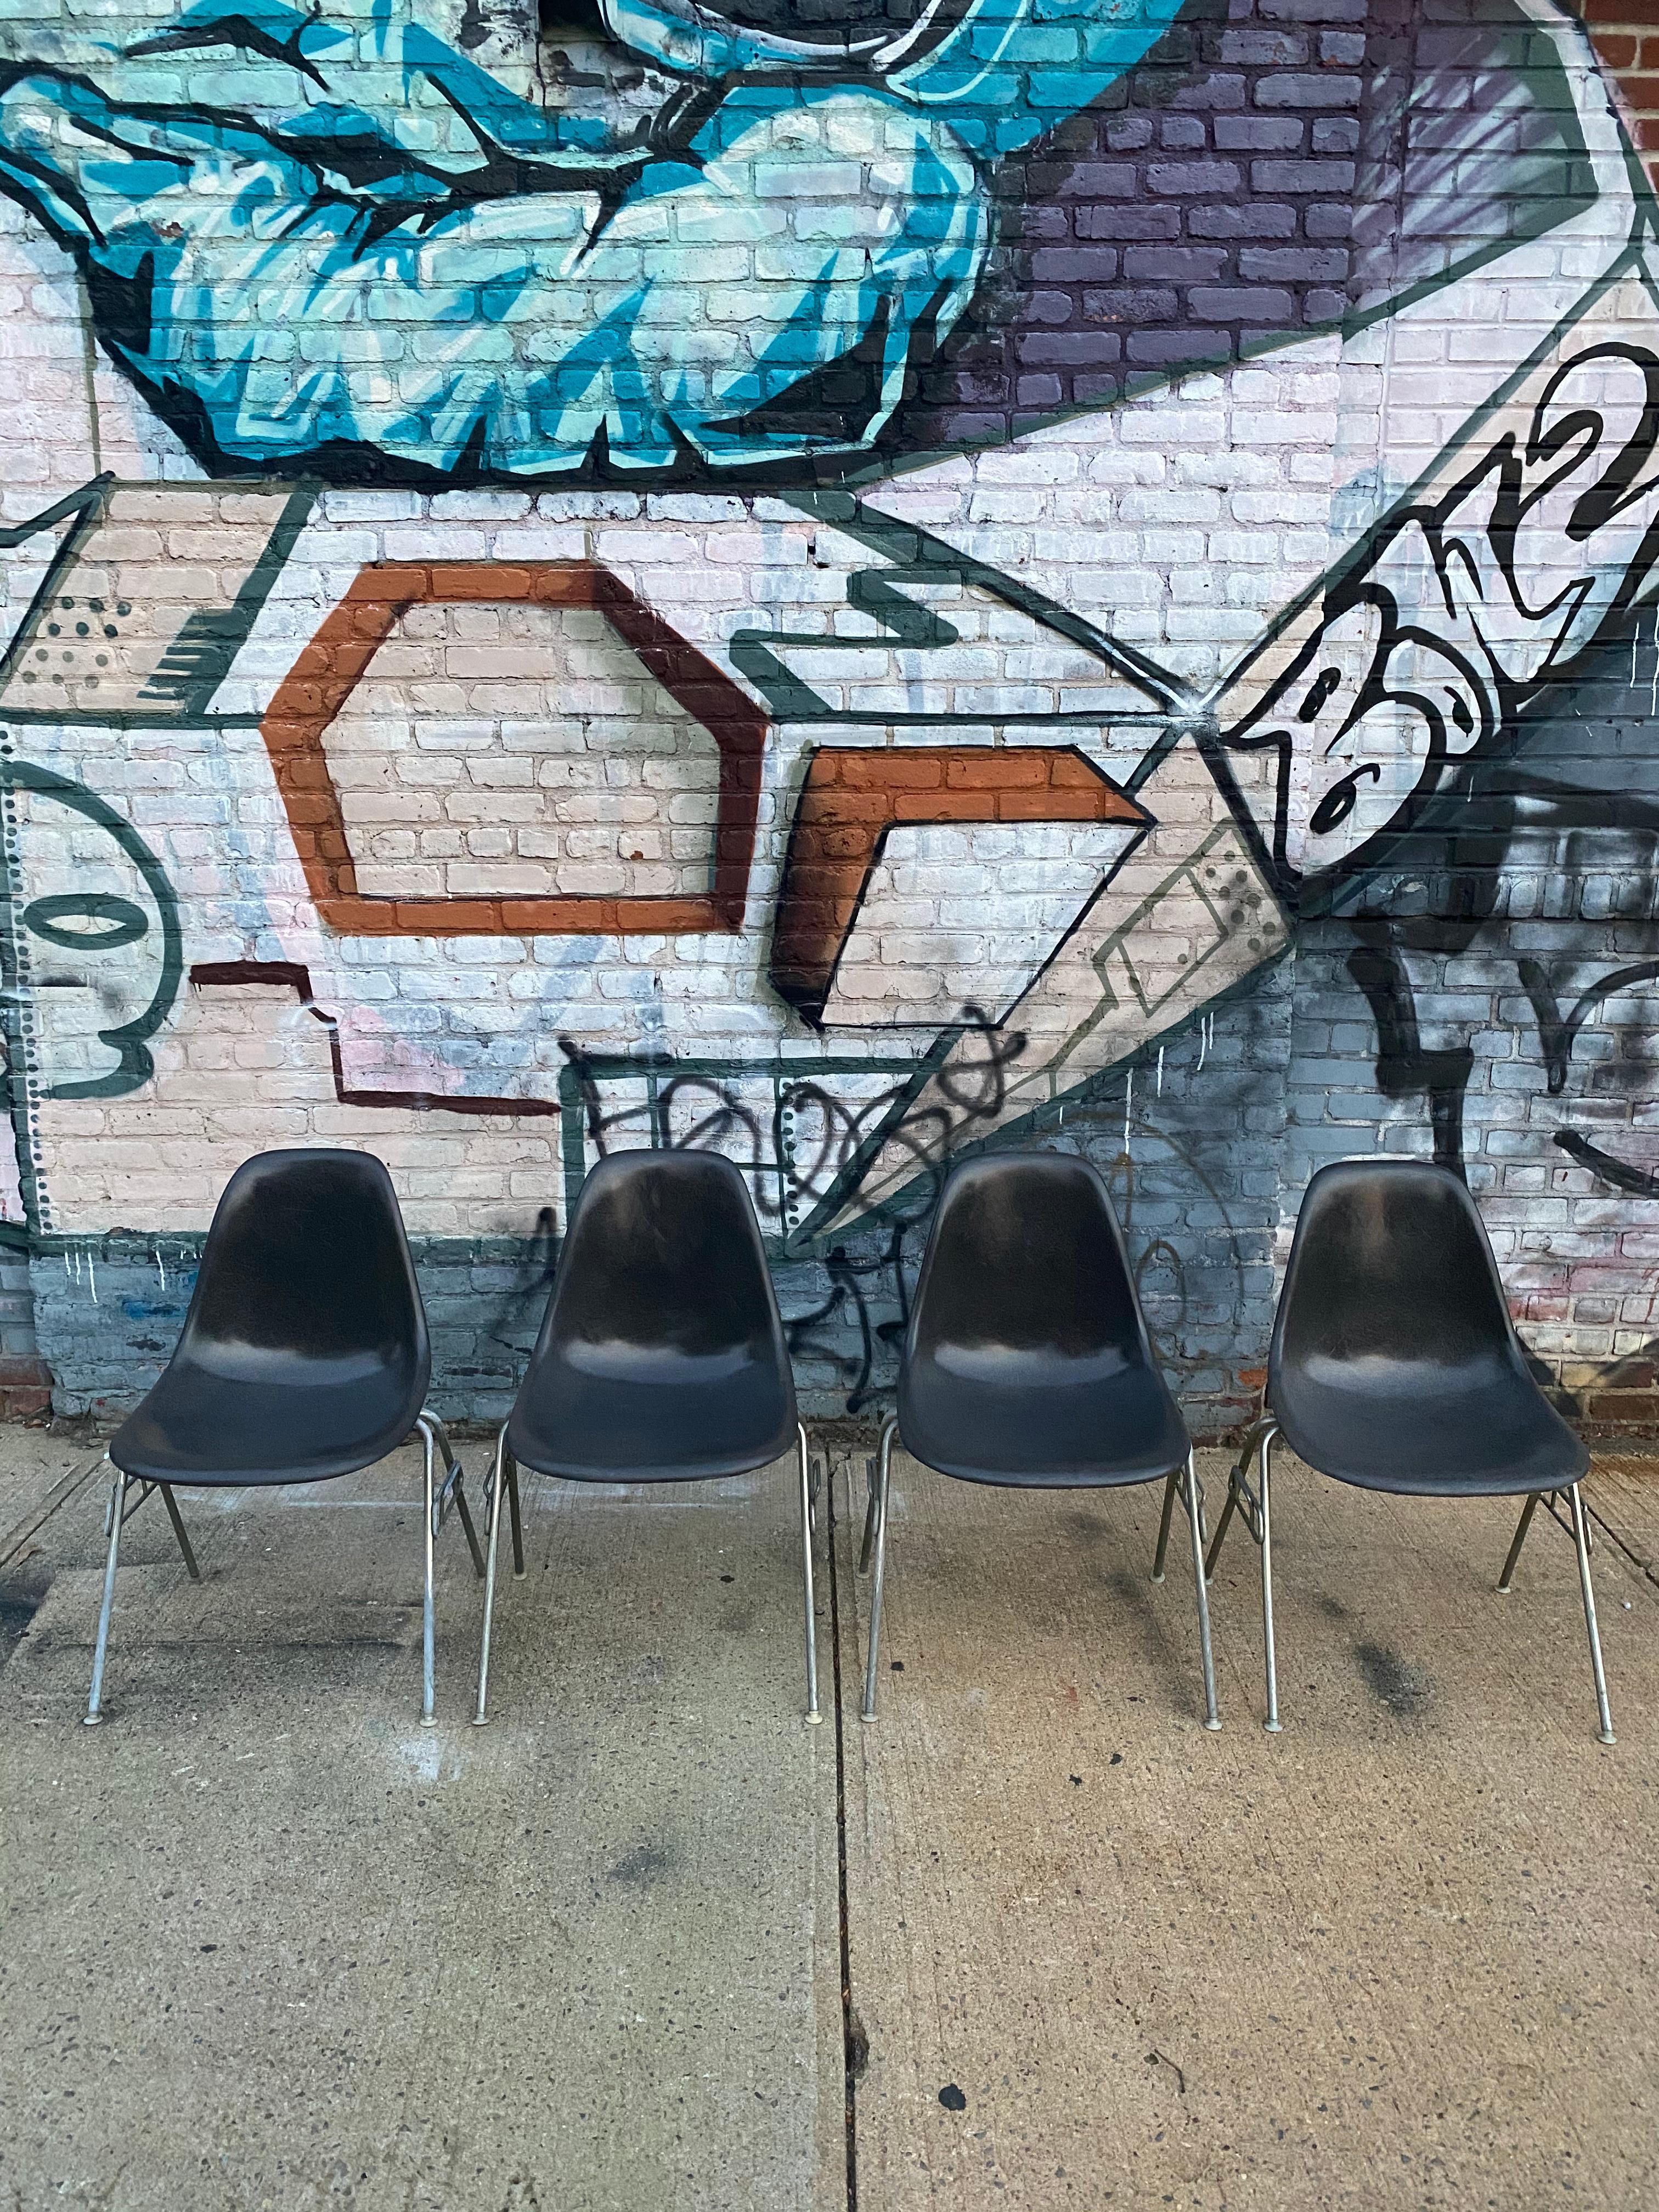 Beautiful set of 4 Herman Miller Eames fiberglass dining chairs. On vintage Herman Miller stacking base. Elephant grey is one of the best colors for this chair. All chairs signed and guaranteed authentic. Rubber shock mounts re adhered for